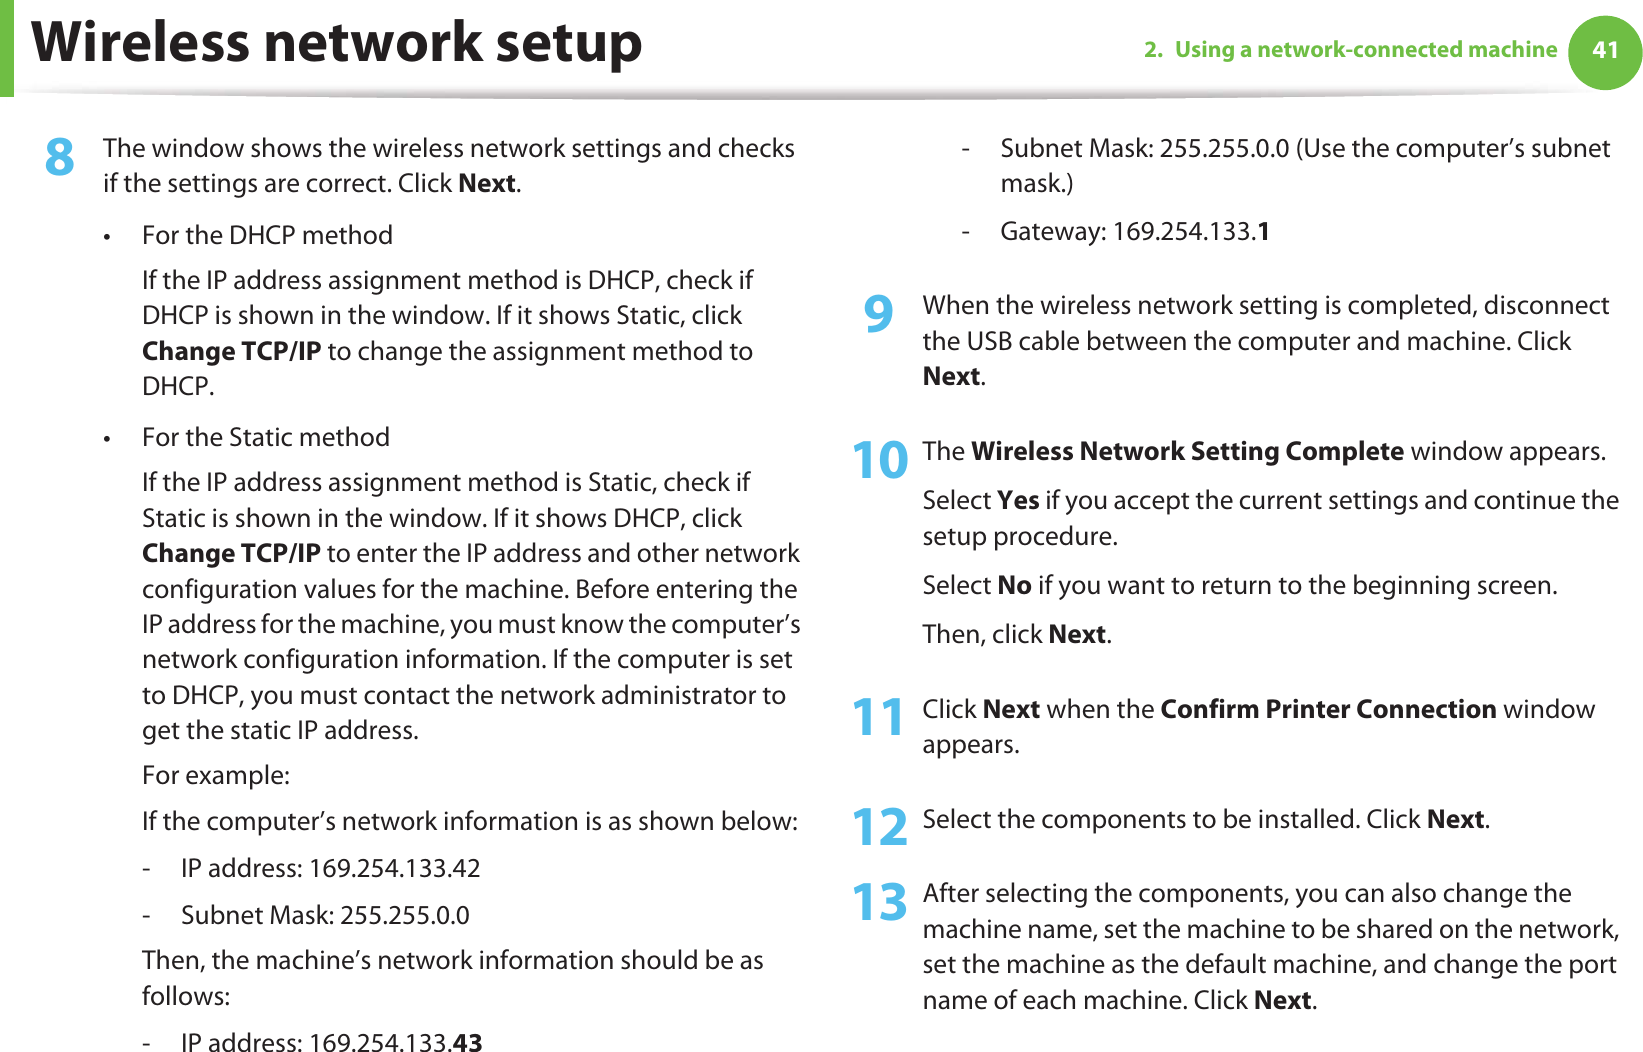 Wireless network setup 412. Using a network-connected machine8  The window shows the wireless network settings and checks if the settings are correct. Click Next.• For the DHCP methodIf the IP address assignment method is DHCP, check if DHCP is shown in the window. If it shows Static, click Change TCP/IP to change the assignment method to DHCP.• For the Static methodIf the IP address assignment method is Static, check if Static is shown in the window. If it shows DHCP, click Change TCP/IP to enter the IP address and other network configuration values for the machine. Before entering the IP address for the machine, you must know the computer’s network configuration information. If the computer is set to DHCP, you must contact the network administrator to get the static IP address.For example:If the computer’s network information is as shown below:- IP address: 169.254.133.42- Subnet Mask: 255.255.0.0Then, the machine’s network information should be as follows:- IP address: 169.254.133.43 - Subnet Mask: 255.255.0.0 (Use the computer’s subnet mask.)- Gateway: 169.254.133.19  When the wireless network setting is completed, disconnect the USB cable between the computer and machine. Click Next.10 The Wireless Network Setting Complete window appears.Select Yes if you accept the current settings and continue the setup procedure.Select No if you want to return to the beginning screen. Then, click Next.11 Click Next when the Confirm Printer Connection window appears.12 Select the components to be installed. Click Next.13 After selecting the components, you can also change the machine name, set the machine to be shared on the network, set the machine as the default machine, and change the port name of each machine. Click Next.